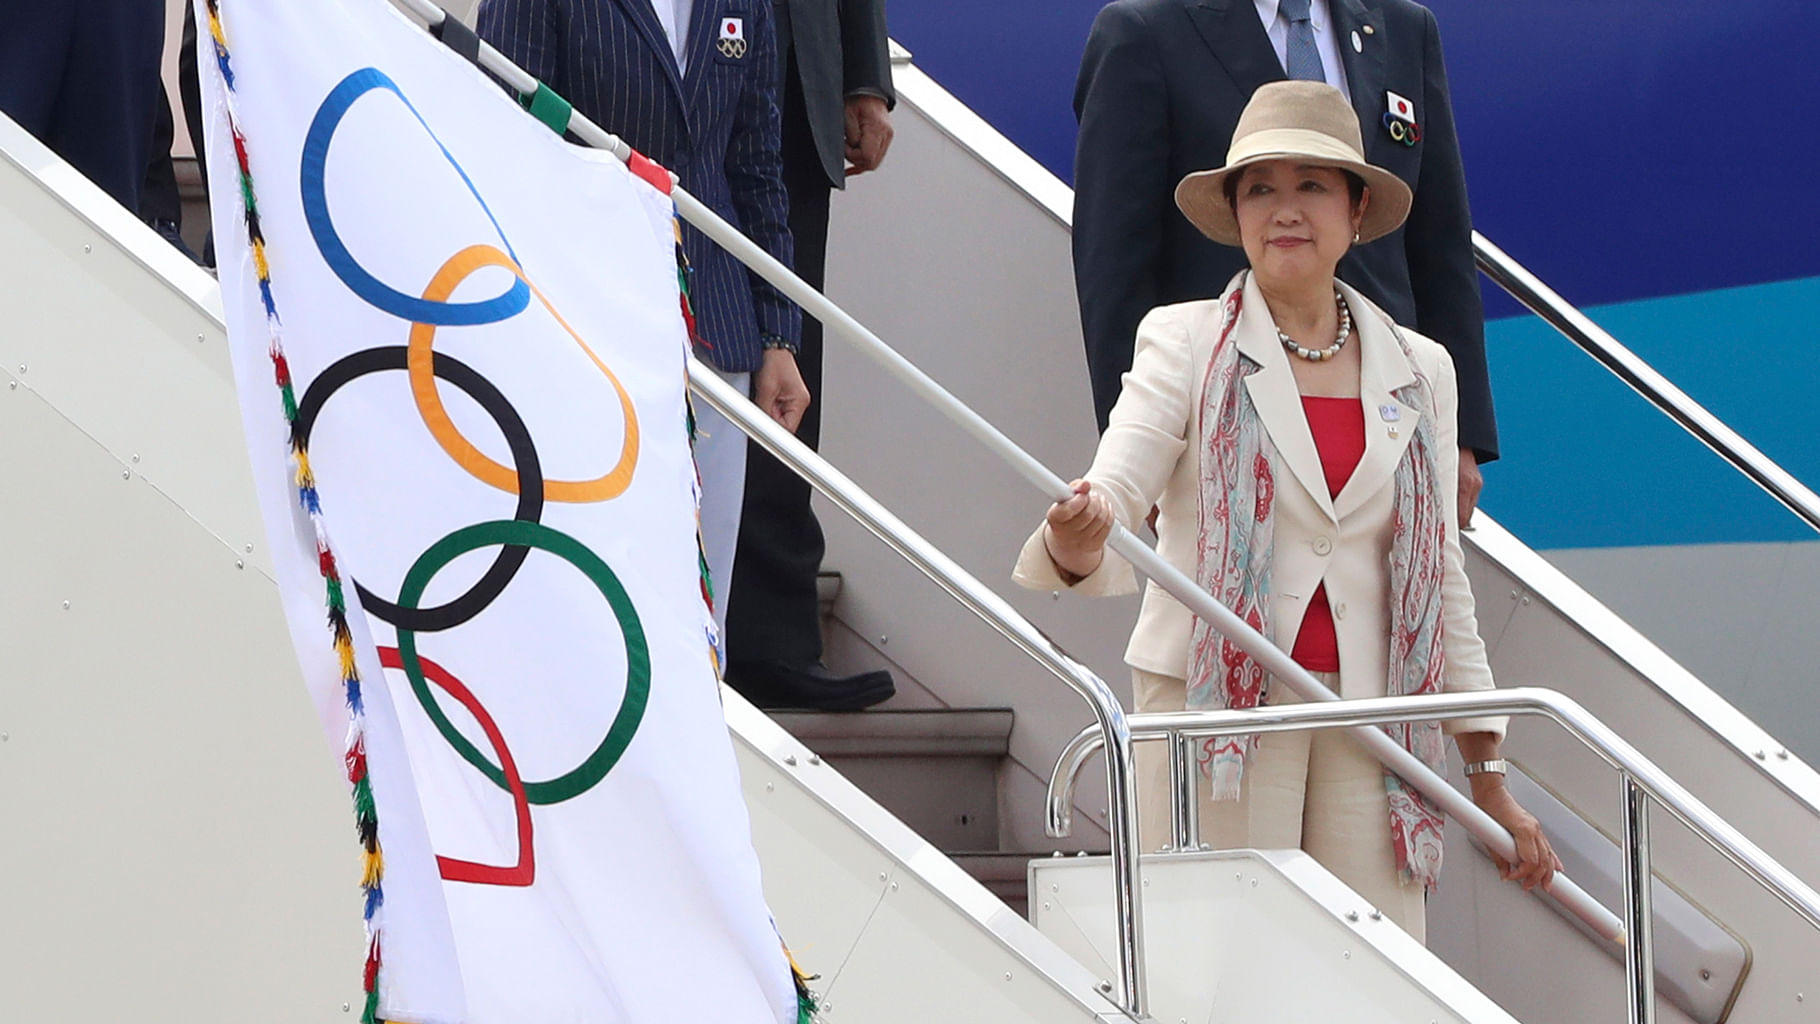  Tokyo Governor Yuriko Koike waves the Olympic flag upon arrival of the flag at Haneda international airport in Tokyo. (Photo: AP)